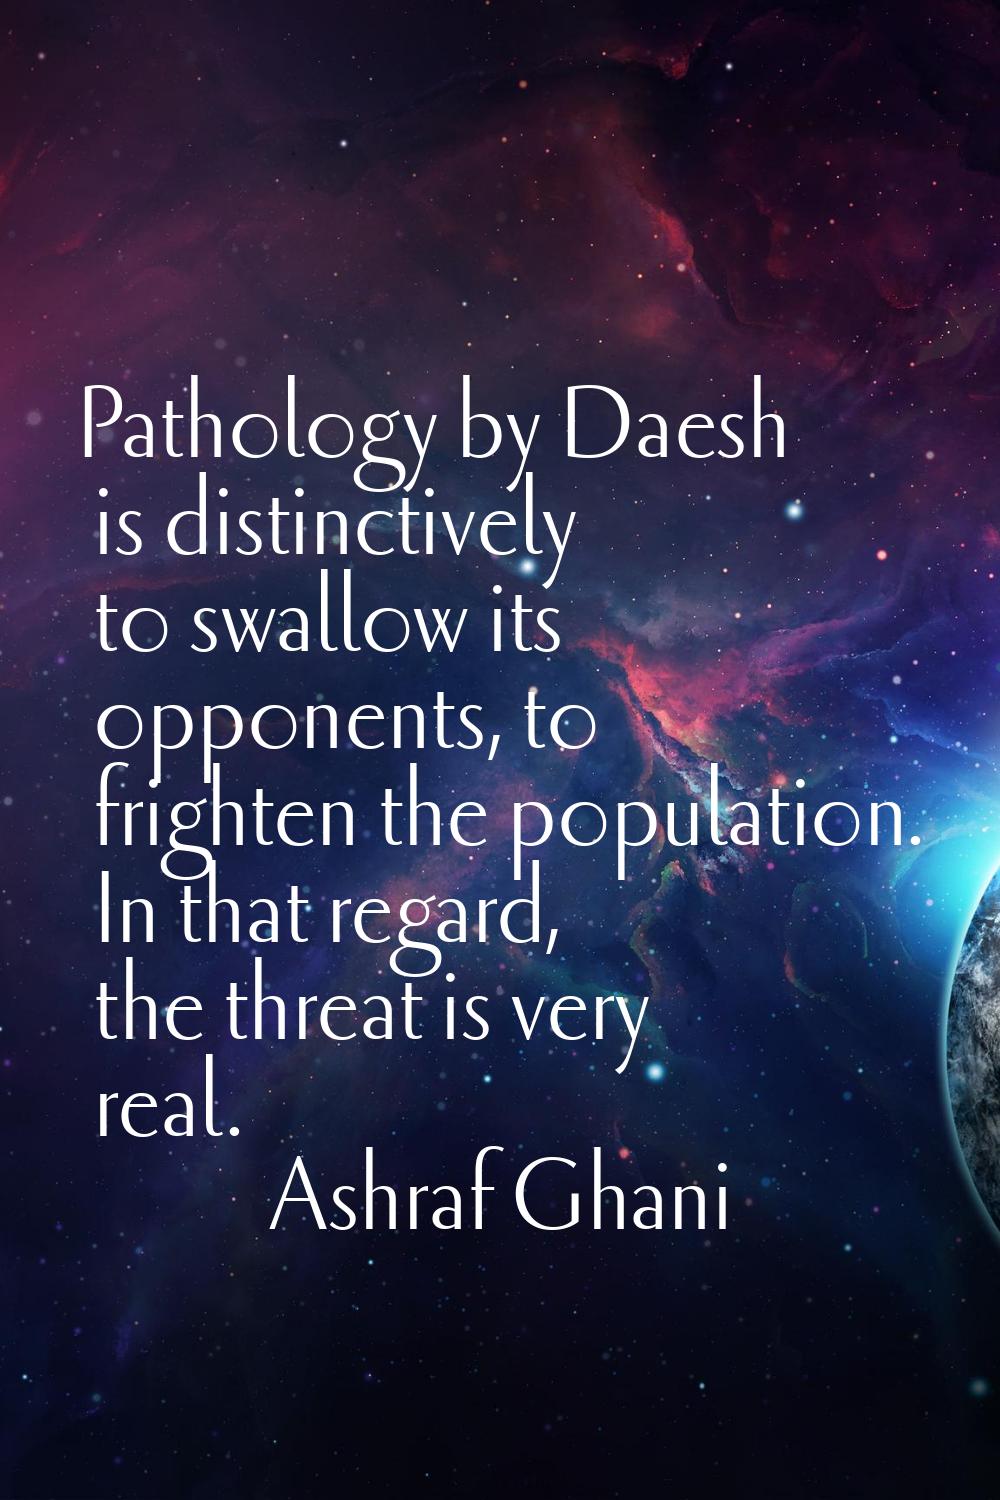 Pathology by Daesh is distinctively to swallow its opponents, to frighten the population. In that r